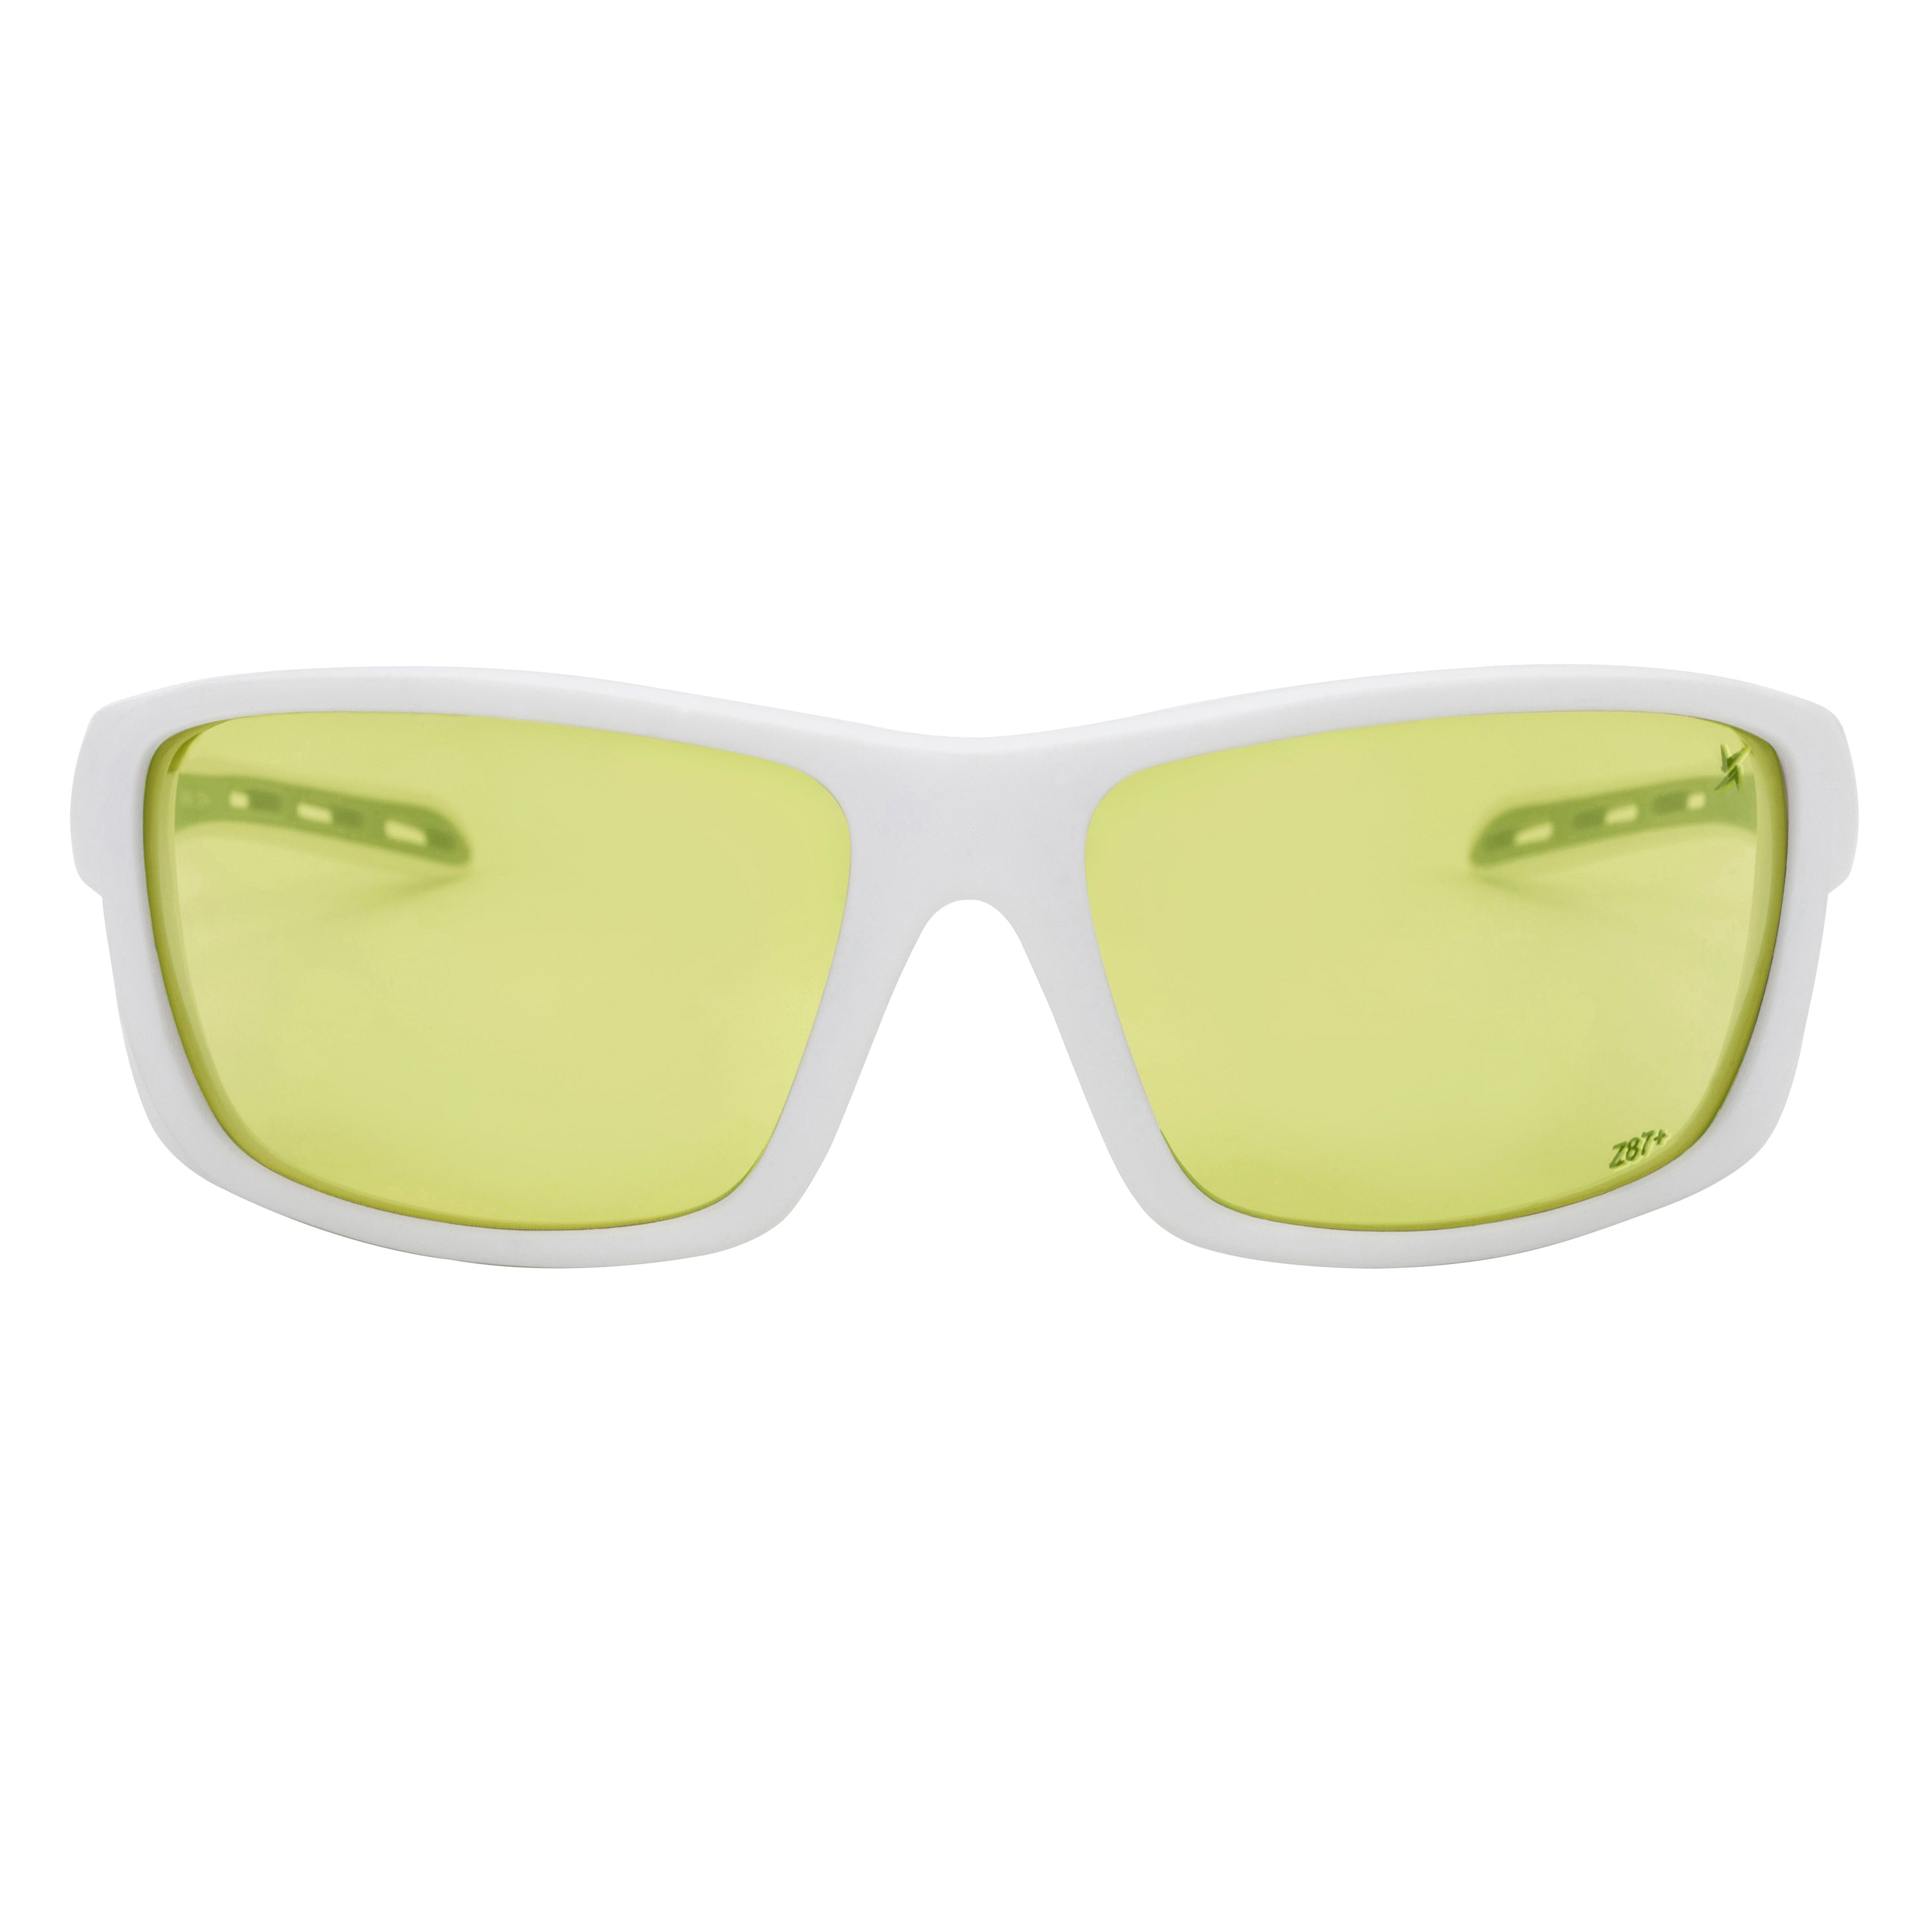 Yellow to Grey Photochromic Lens with Yellow Flash Mirror Coating White Full Frame Wrap Around Sport Safety Sunglasses.